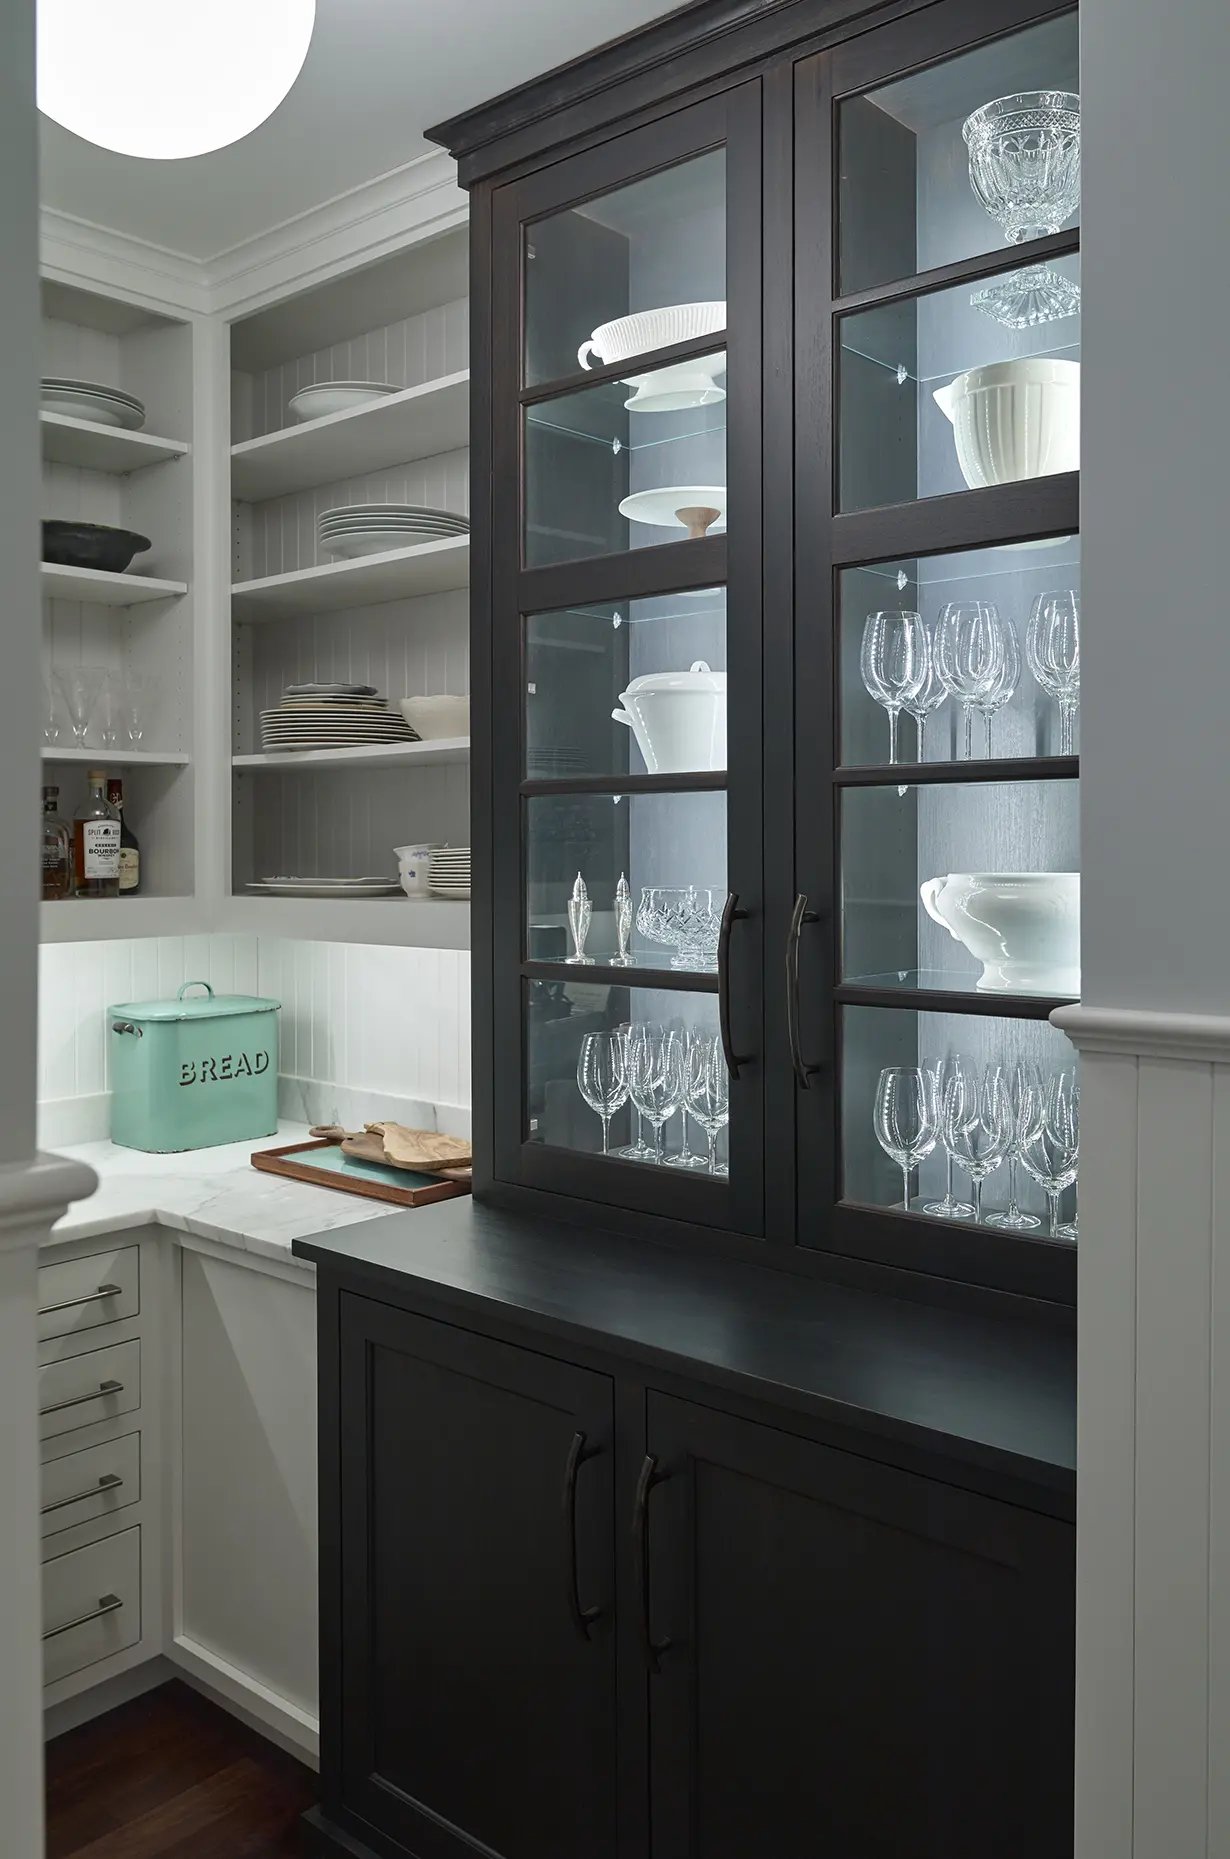 A dark hutch for storing glassware in the pantry, with white and marble accents throughout